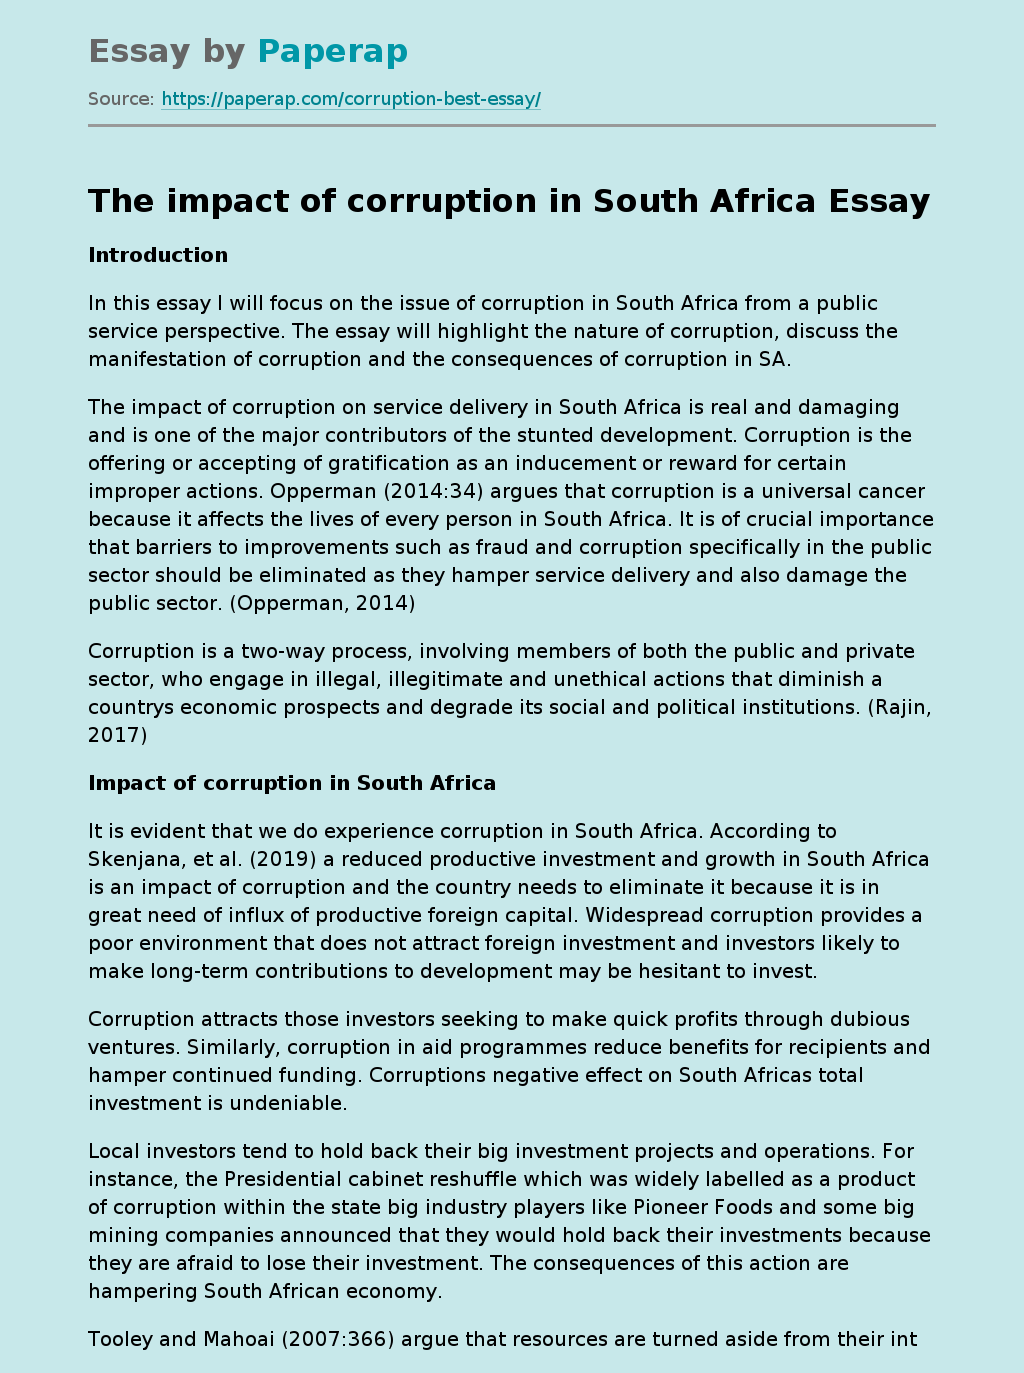 The impact of corruption in South Africa